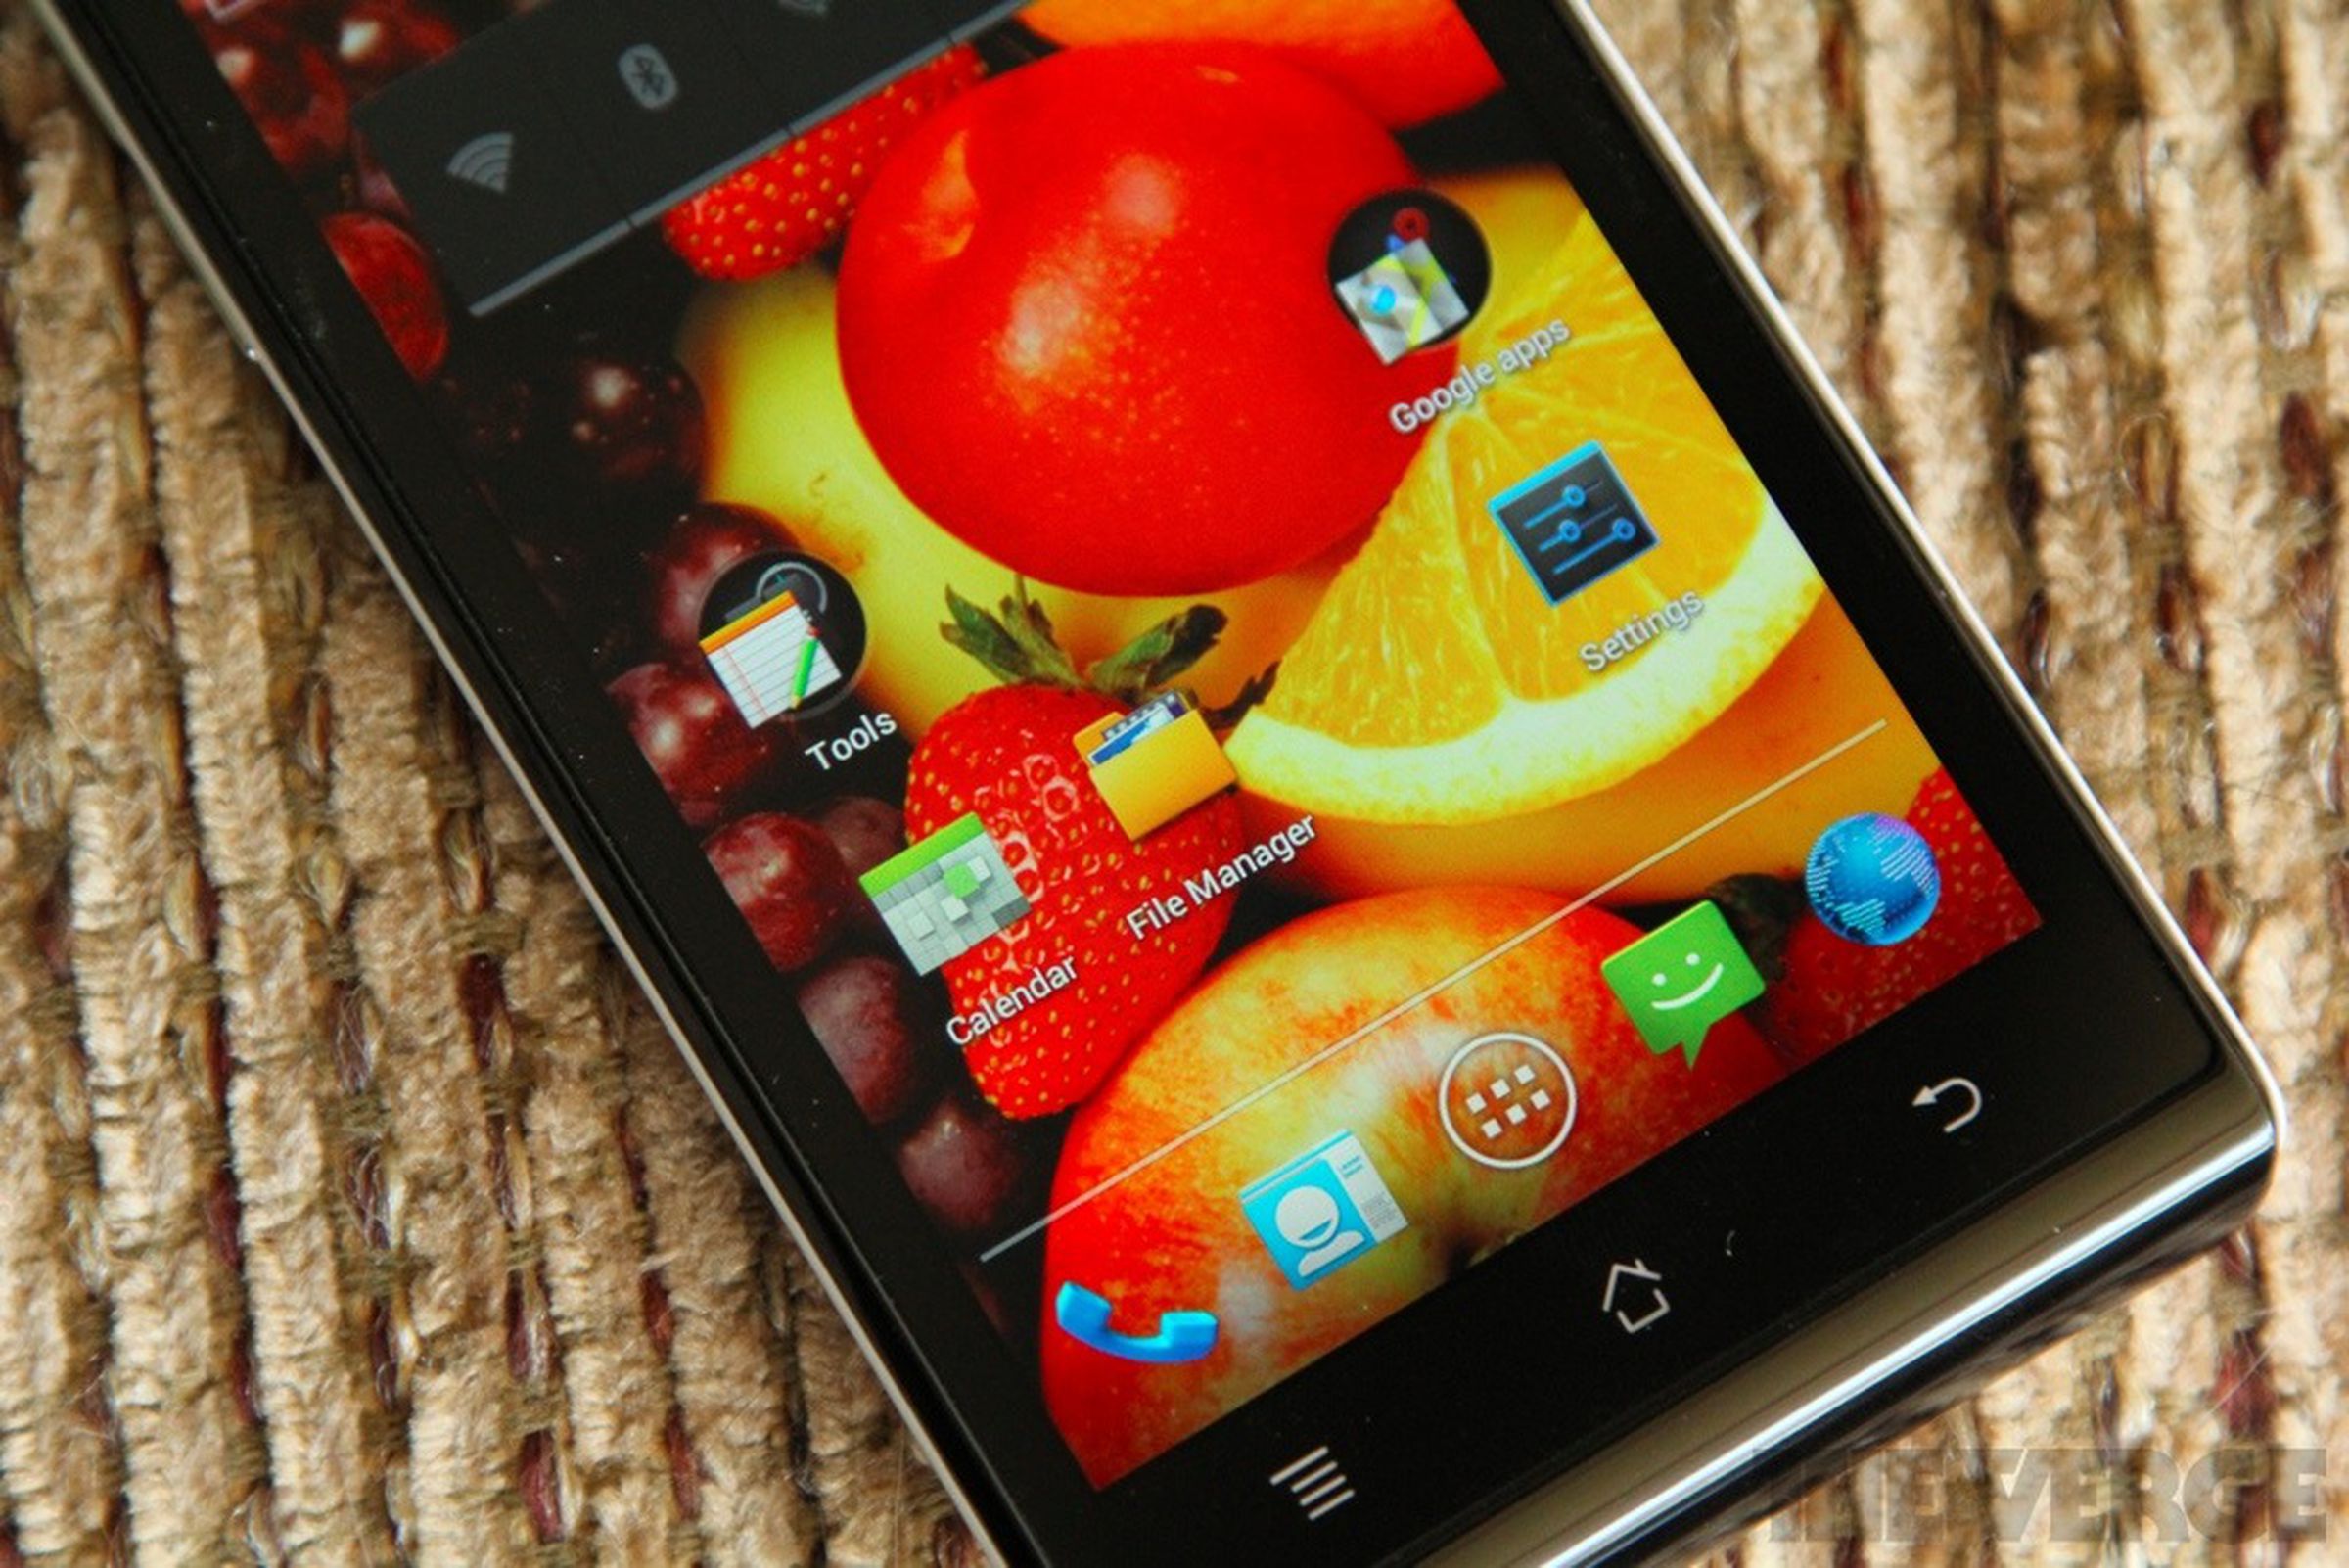 Huawei Ascend P1 review pictures